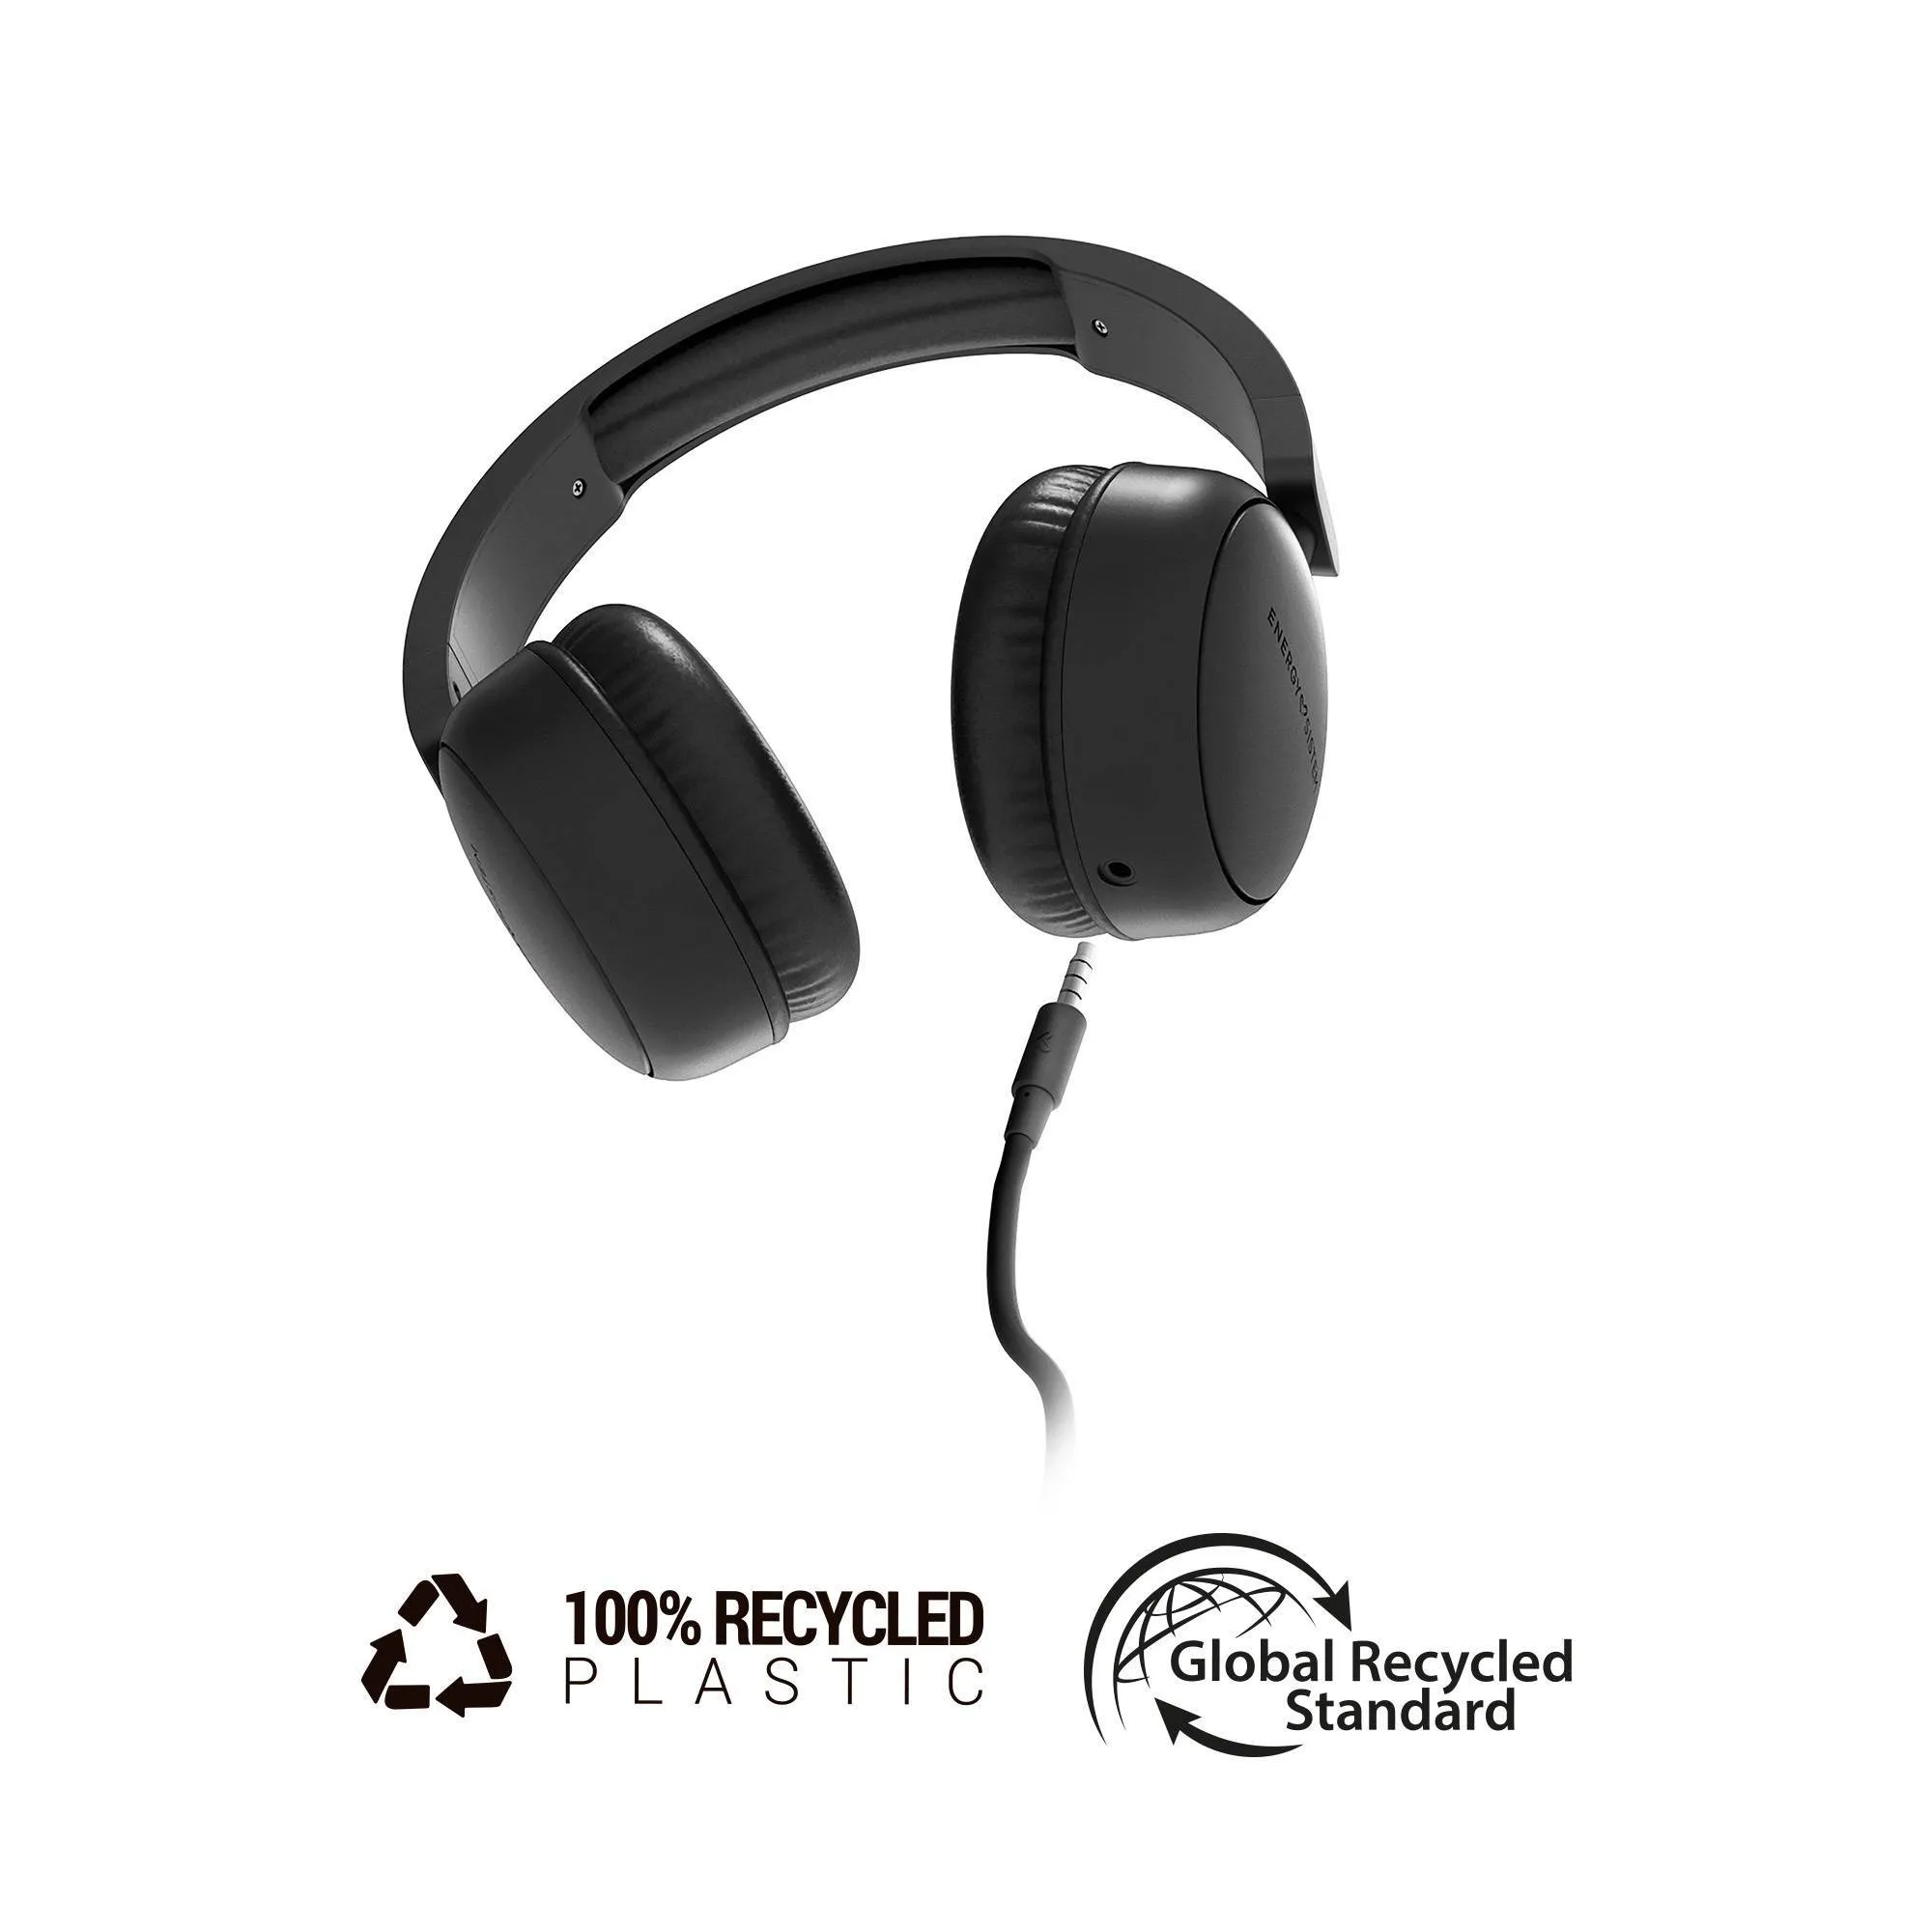 Soundspire wired headphones, made entirely from recycled plastic